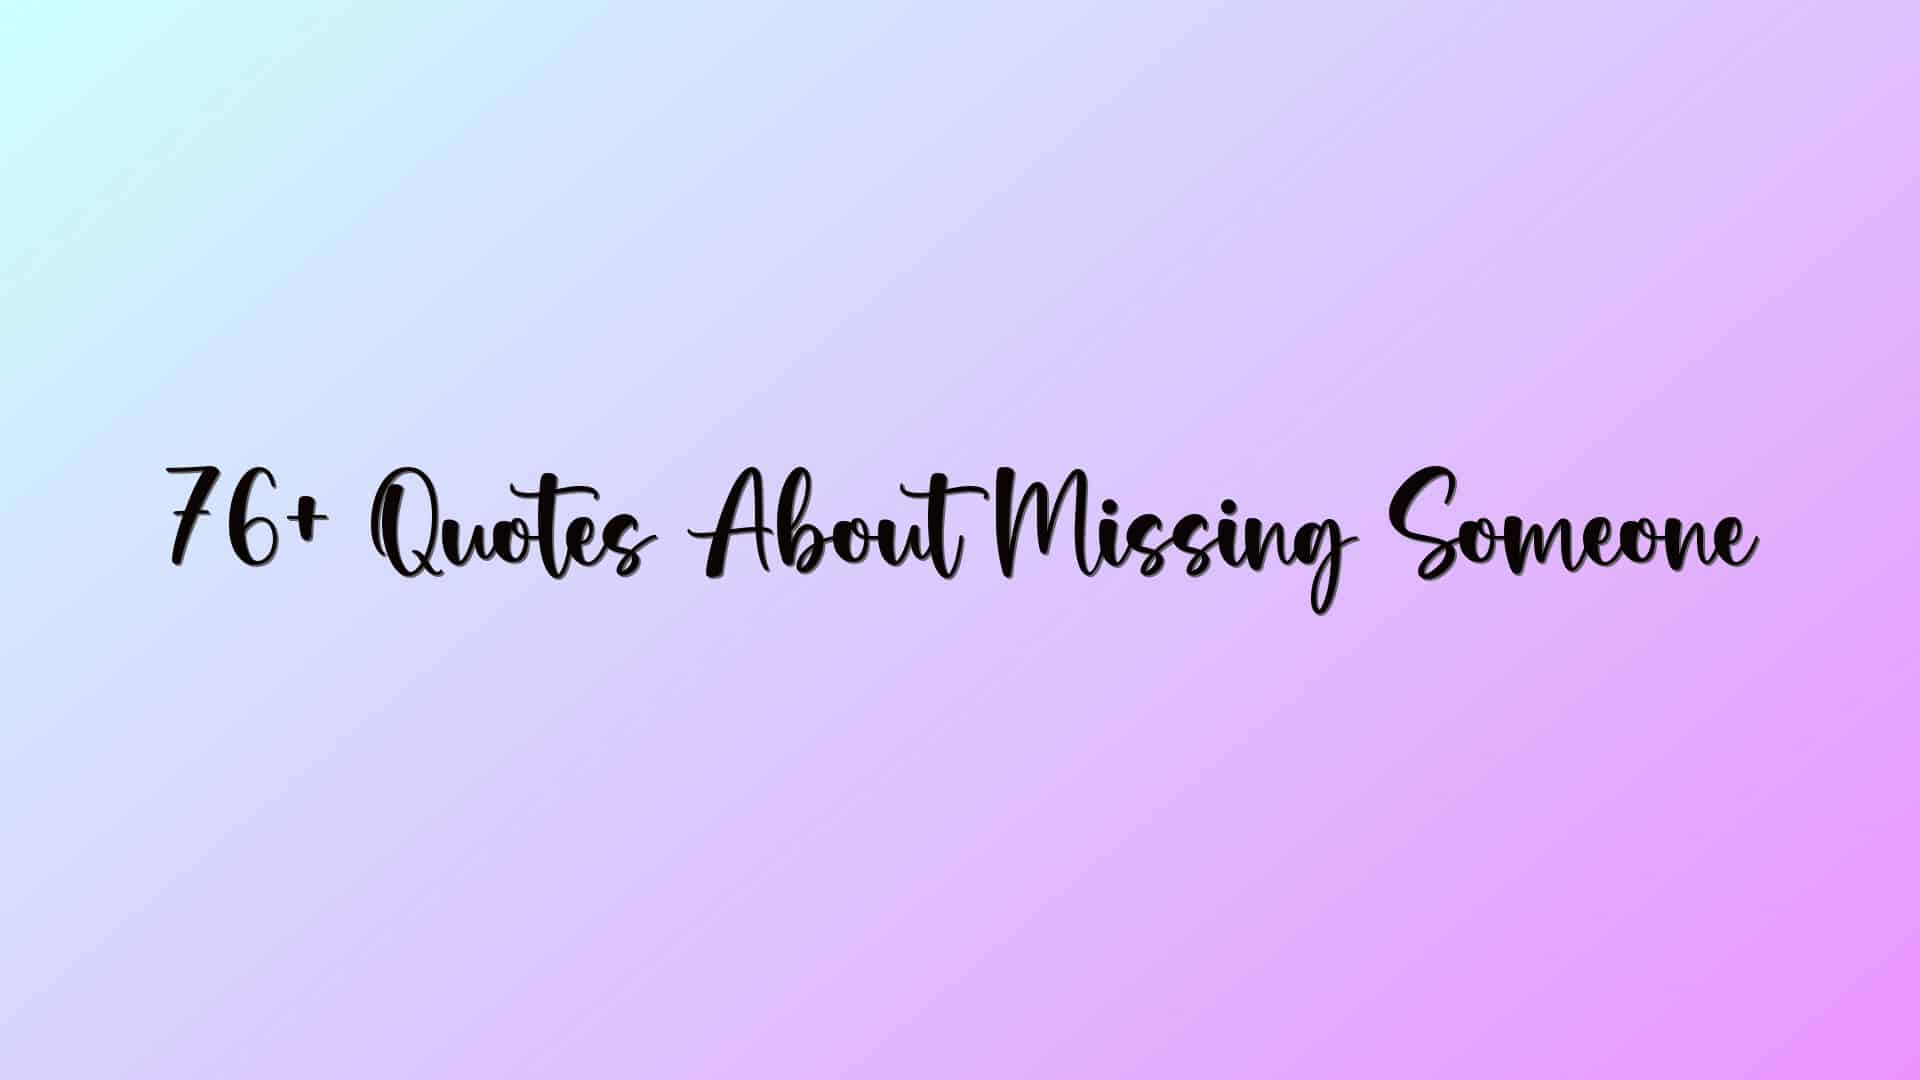 76+ Quotes About Missing Someone